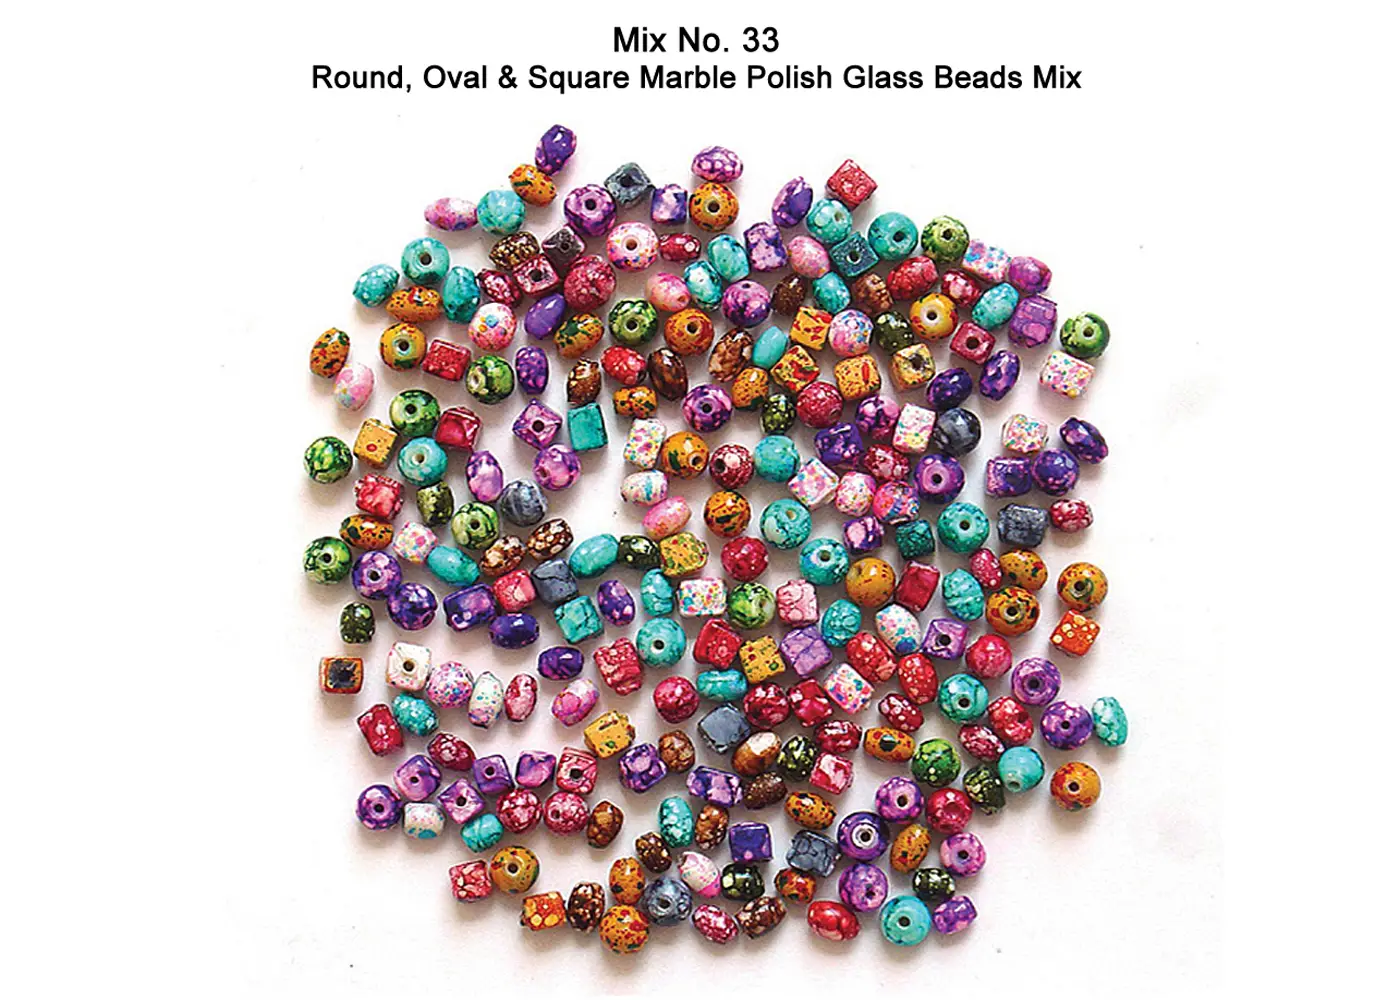 Round Oval & Square Marble Polish Glass Beads Mix